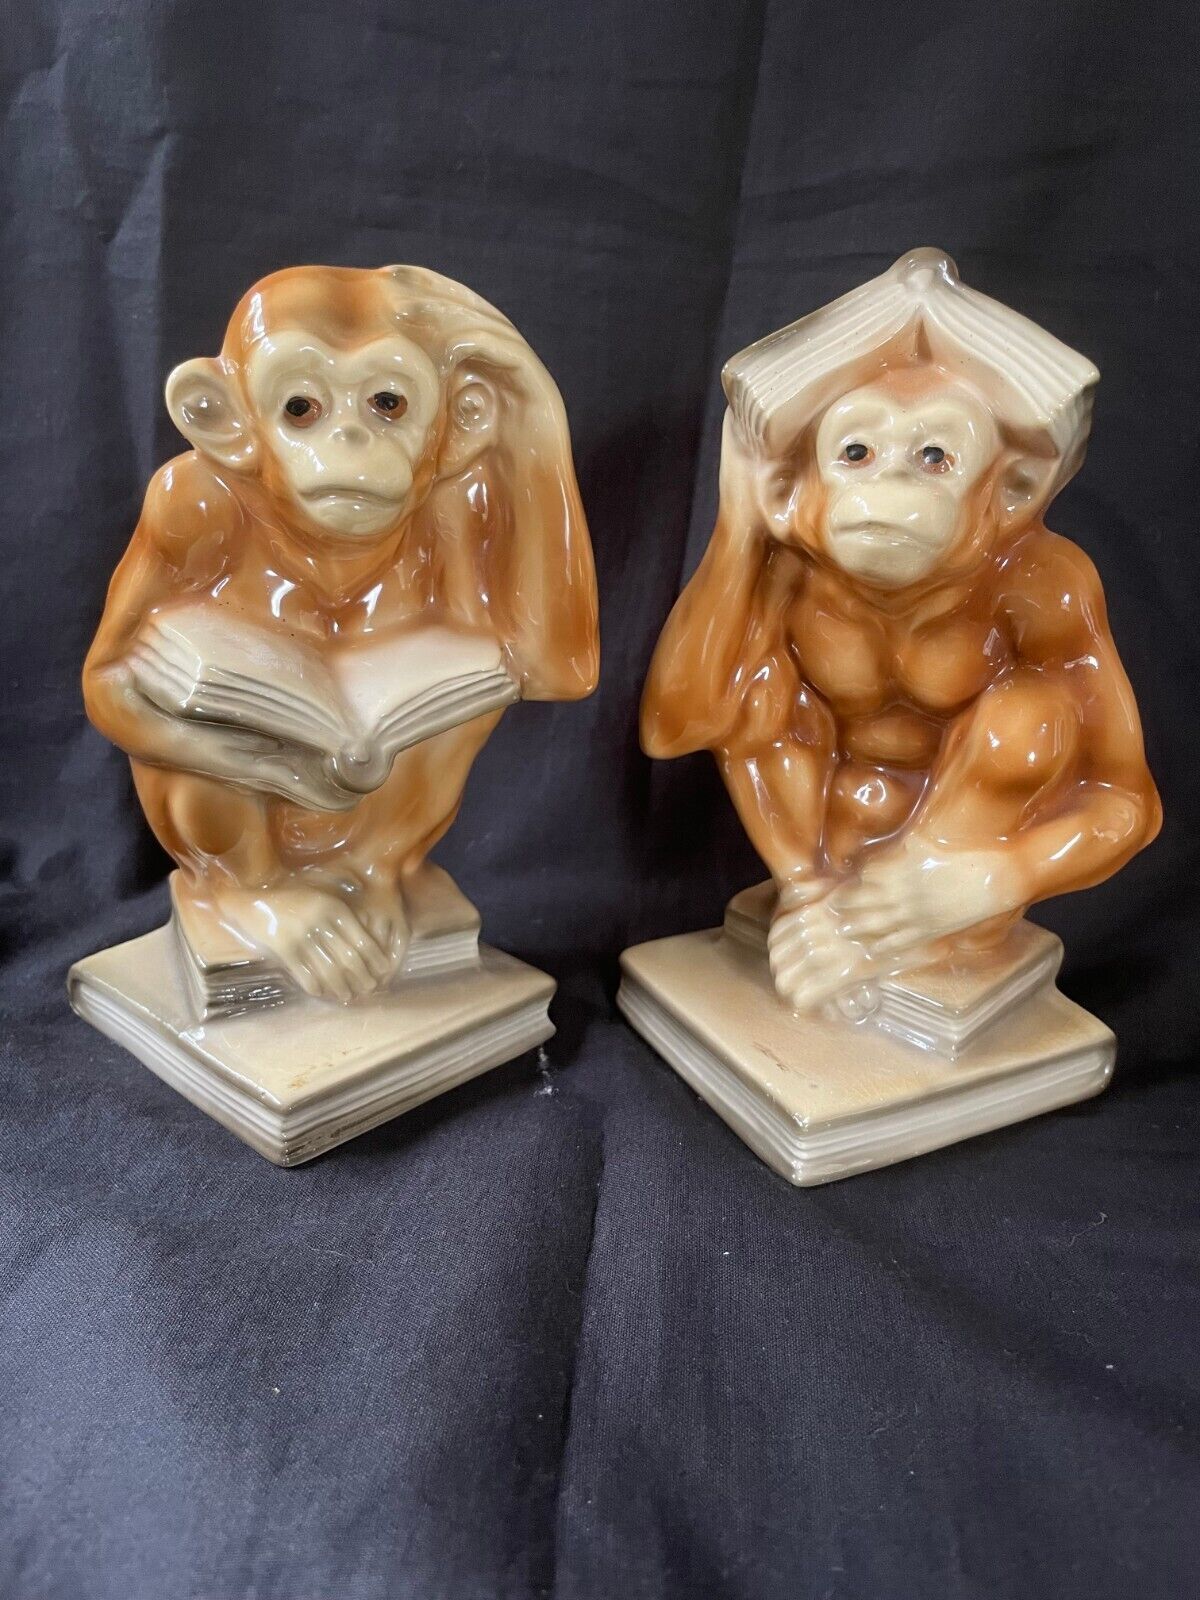 Primary image for antique german porcelain monkey pair of bookends